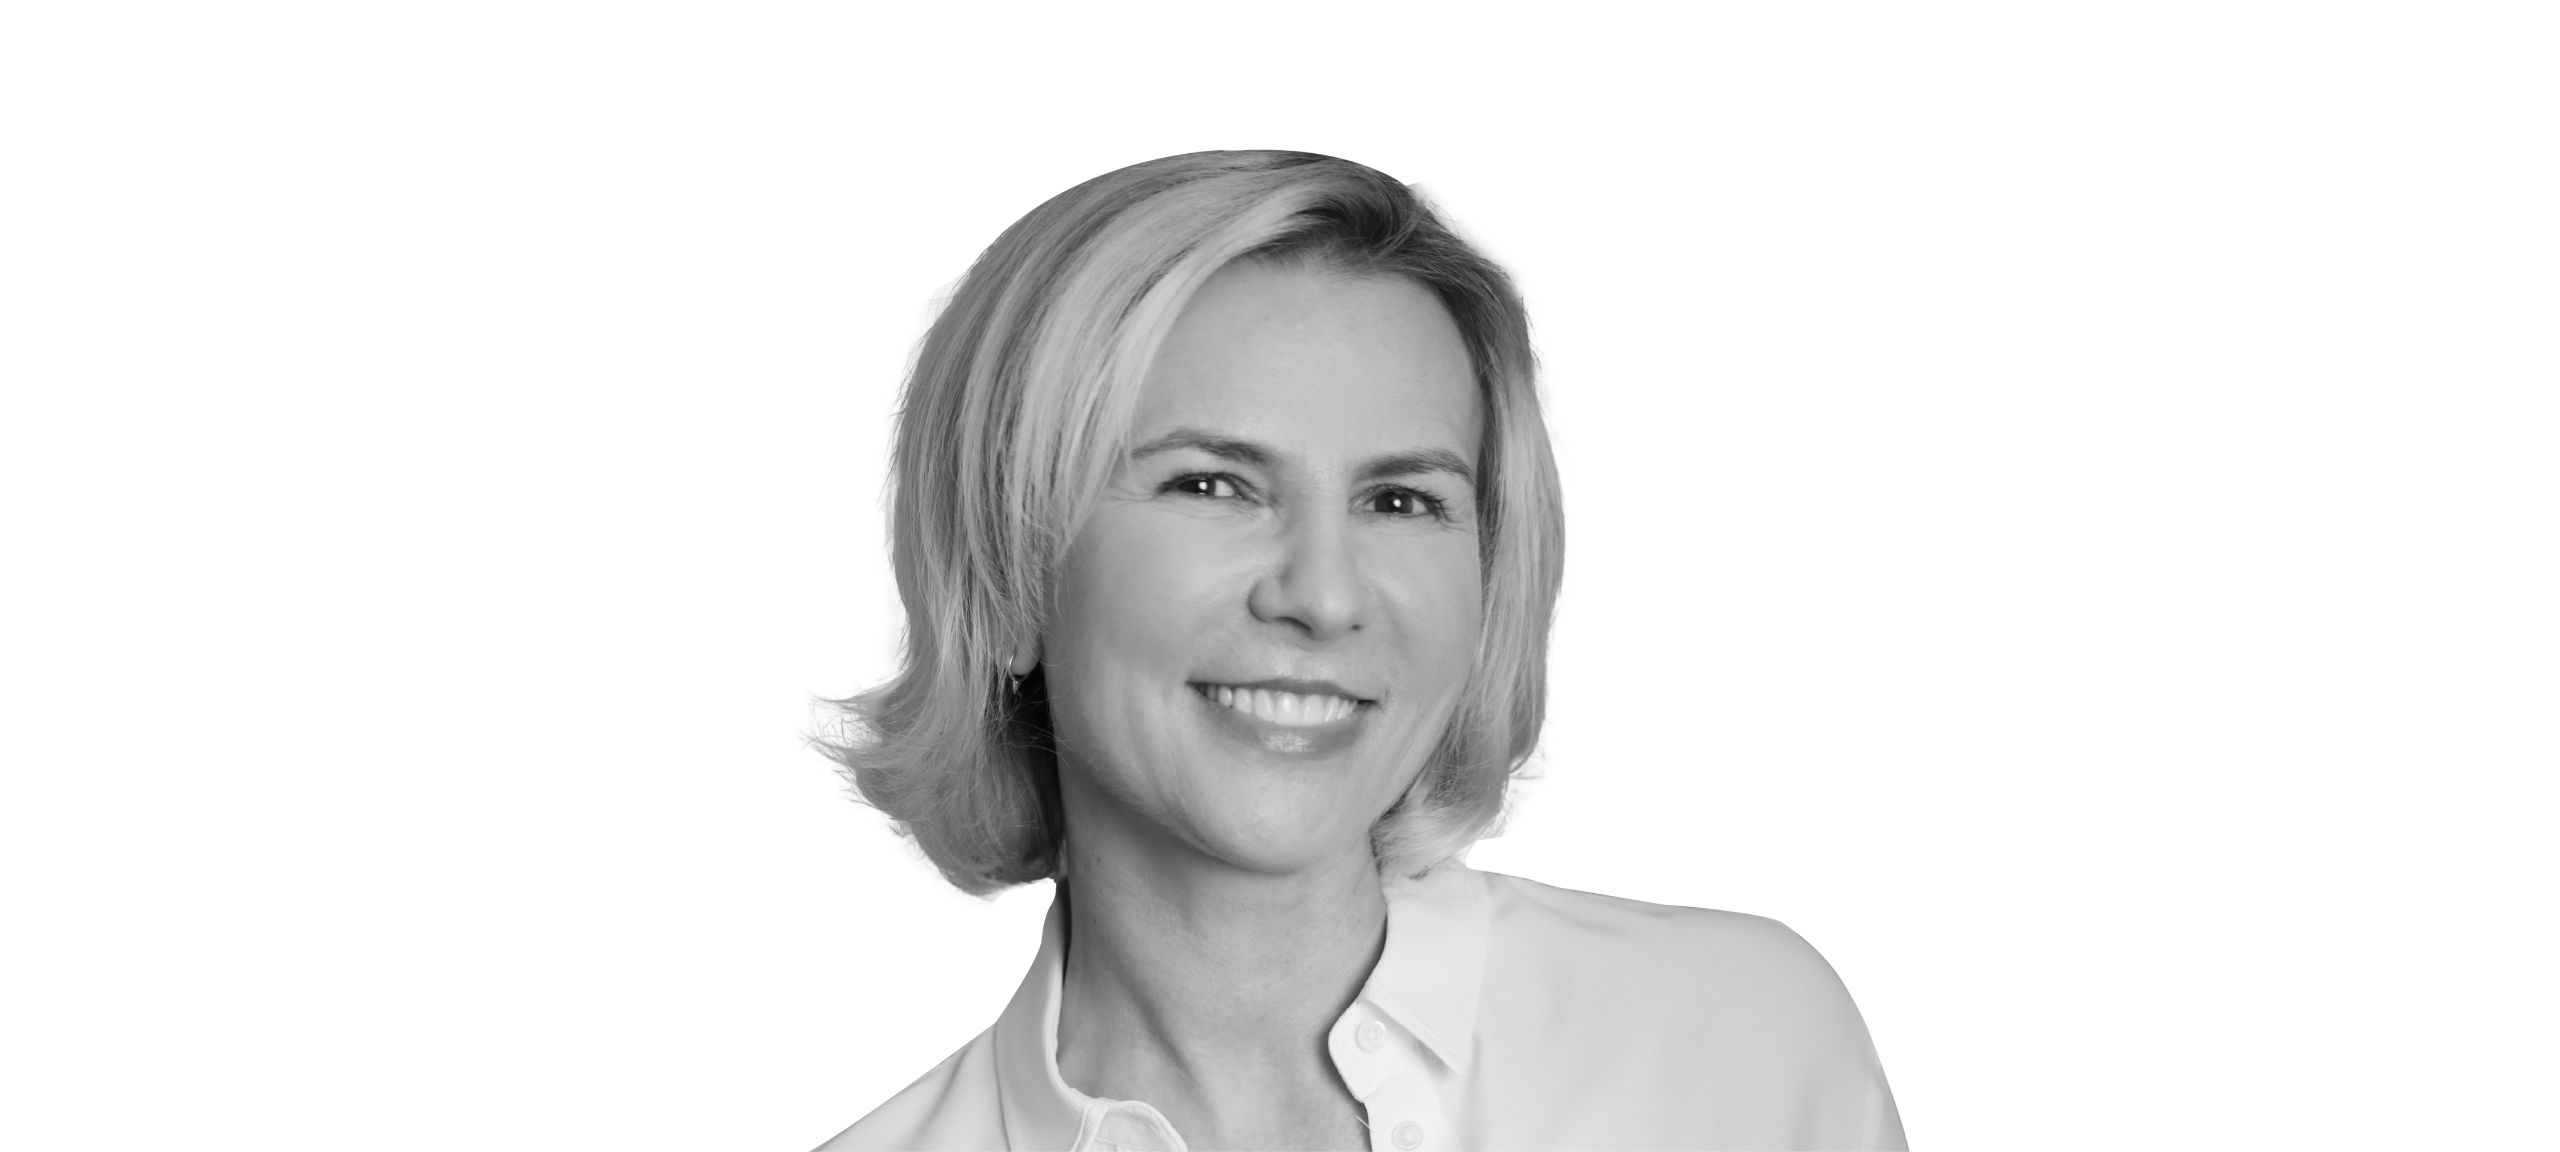 Aude Gandon, global CMO of Nestlé, is pictured from the shoulders up, wearing a white, collared shirt. She has light skin and short blond hair. She is smiling a bright smile and looking directly into the camera.